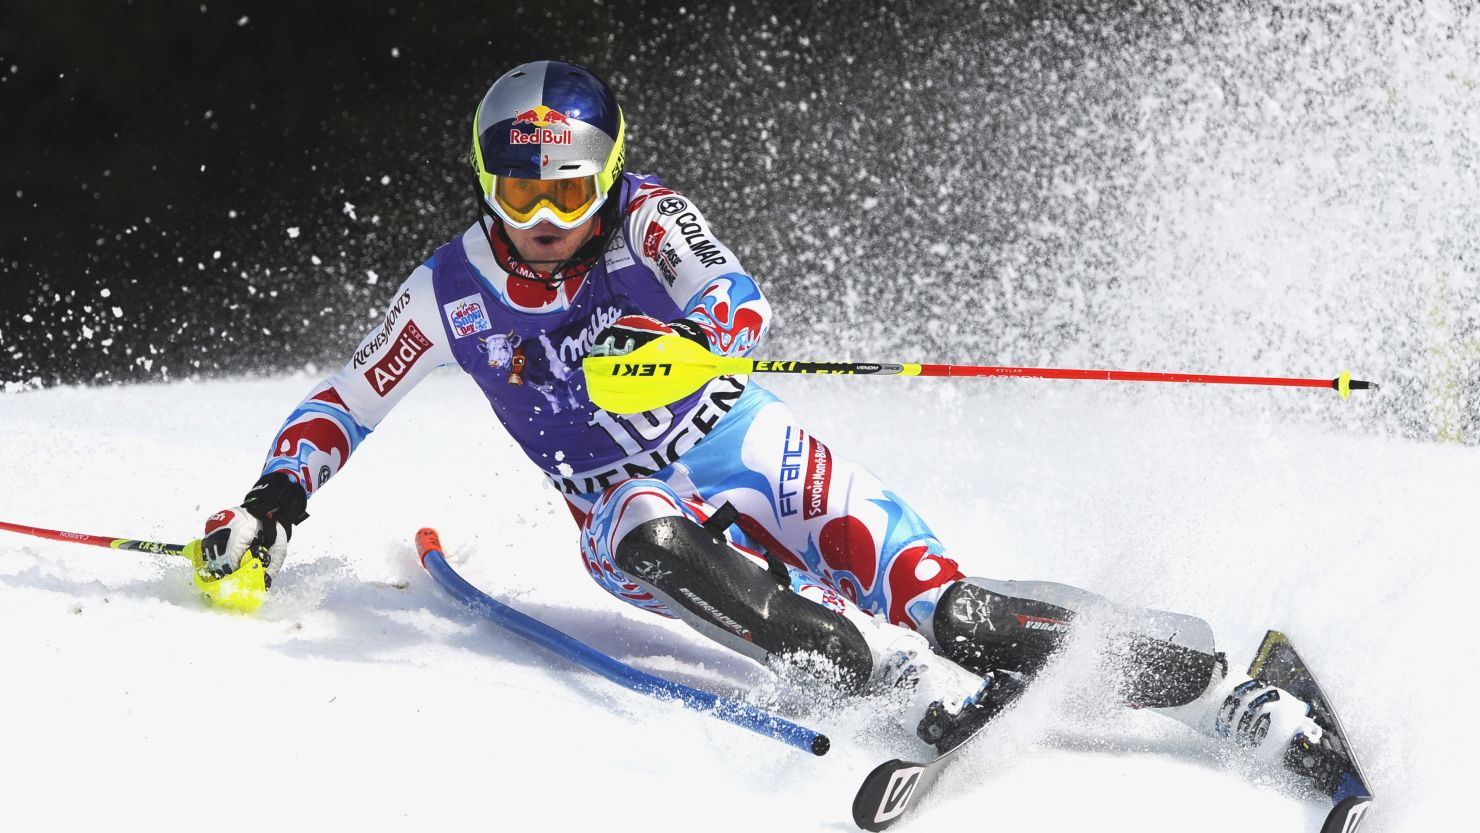  Alexis Pinturault wins his first World Cup event of the season in Wengen with a storming slalom run.